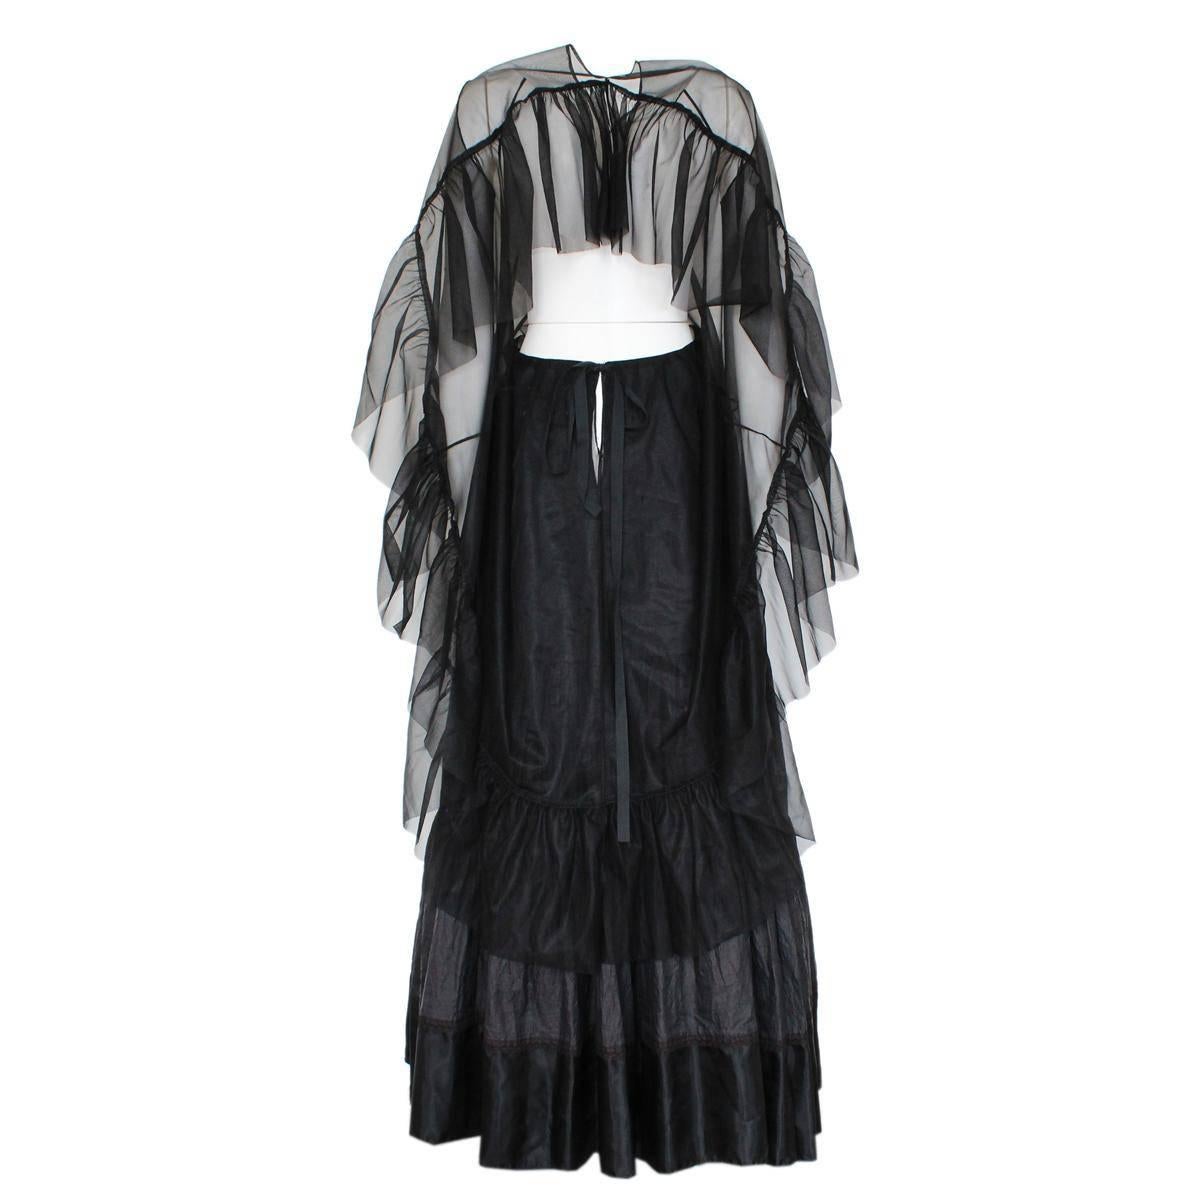 Superb dress by Maison Martin Margiela
Long dress
Polyester and polyamide
Black color
With folds
Transparent taffeta
Total lenght (shoulder/hem) cm 140 (55.1 inches)
Worldwide express shipping included in the price !